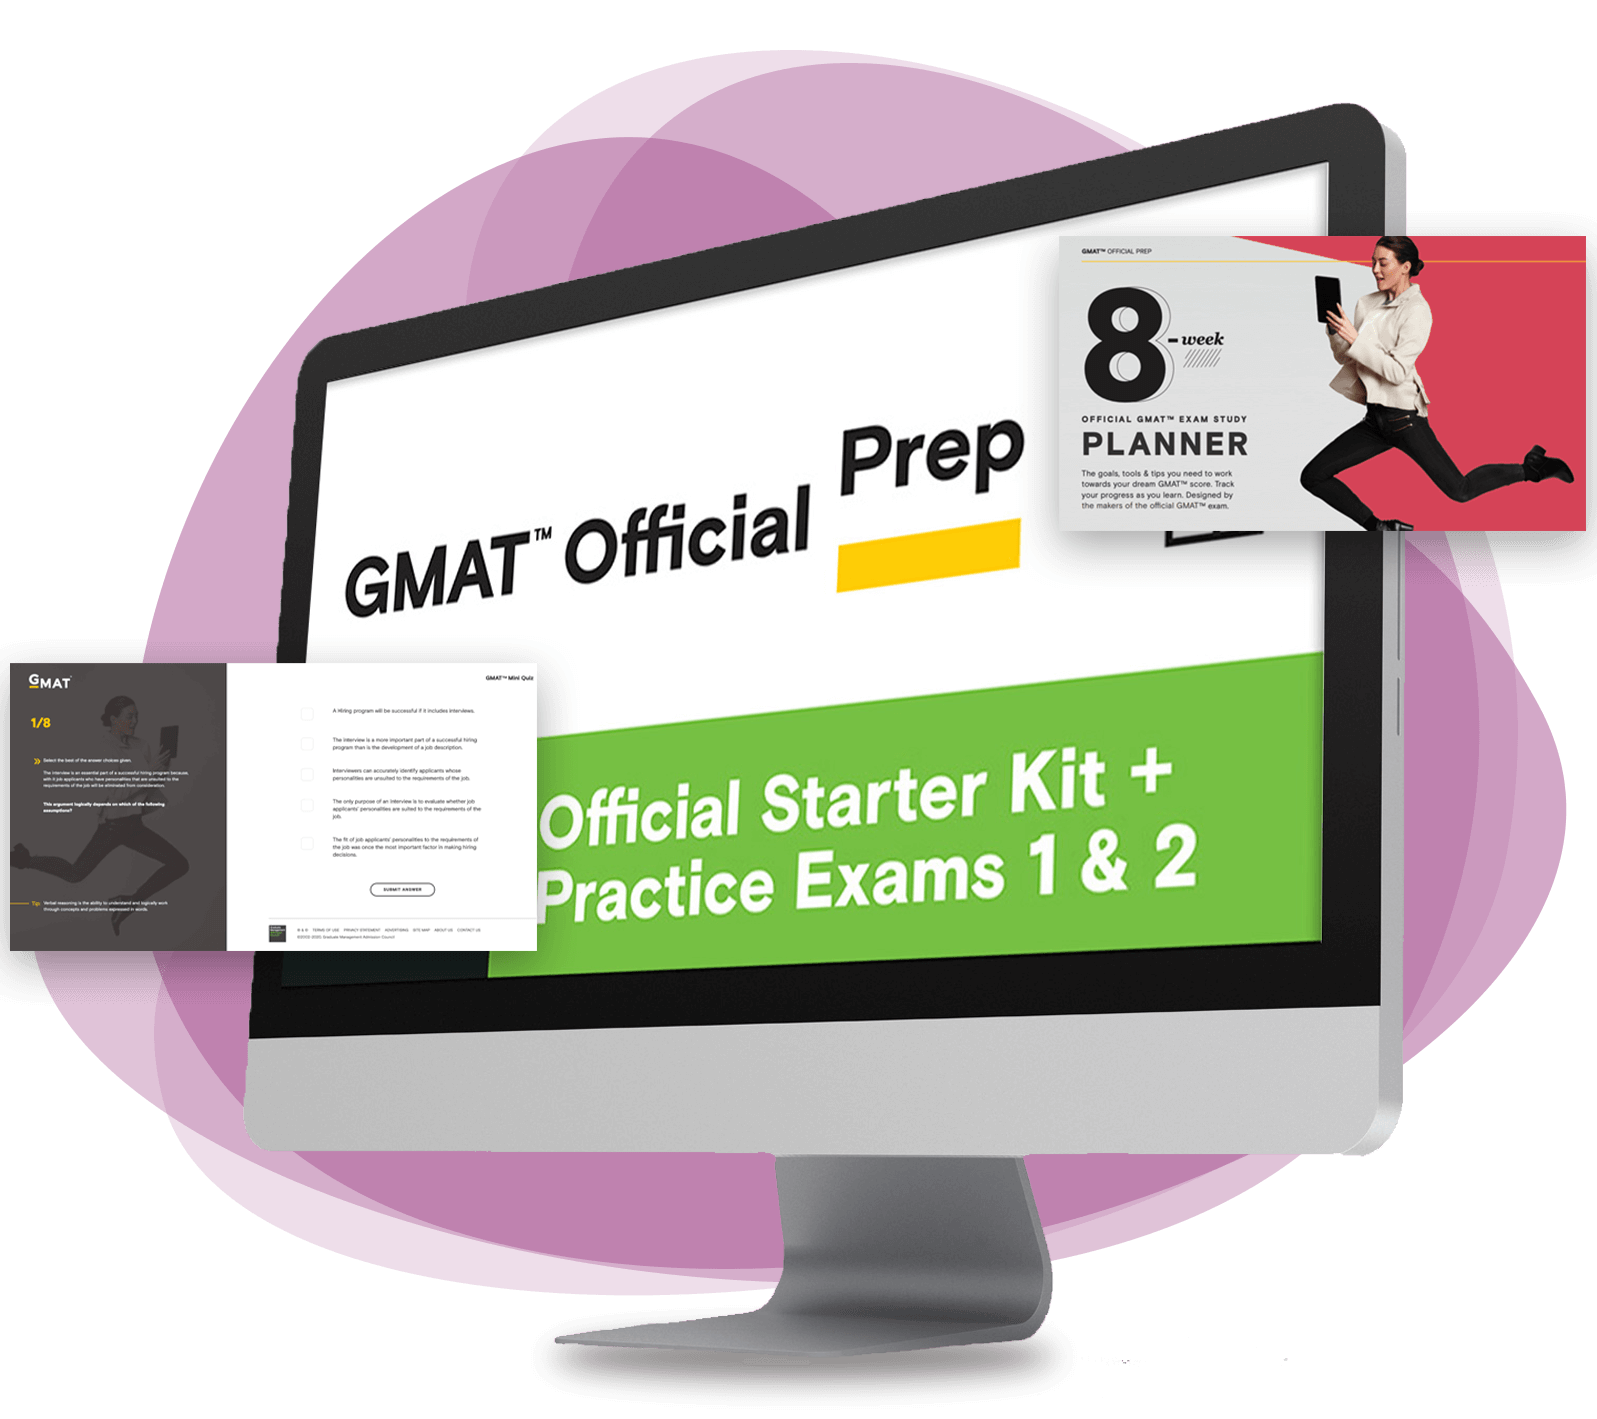 4 Steps to Analyze Your GMAT Practice Tests (Part 2)